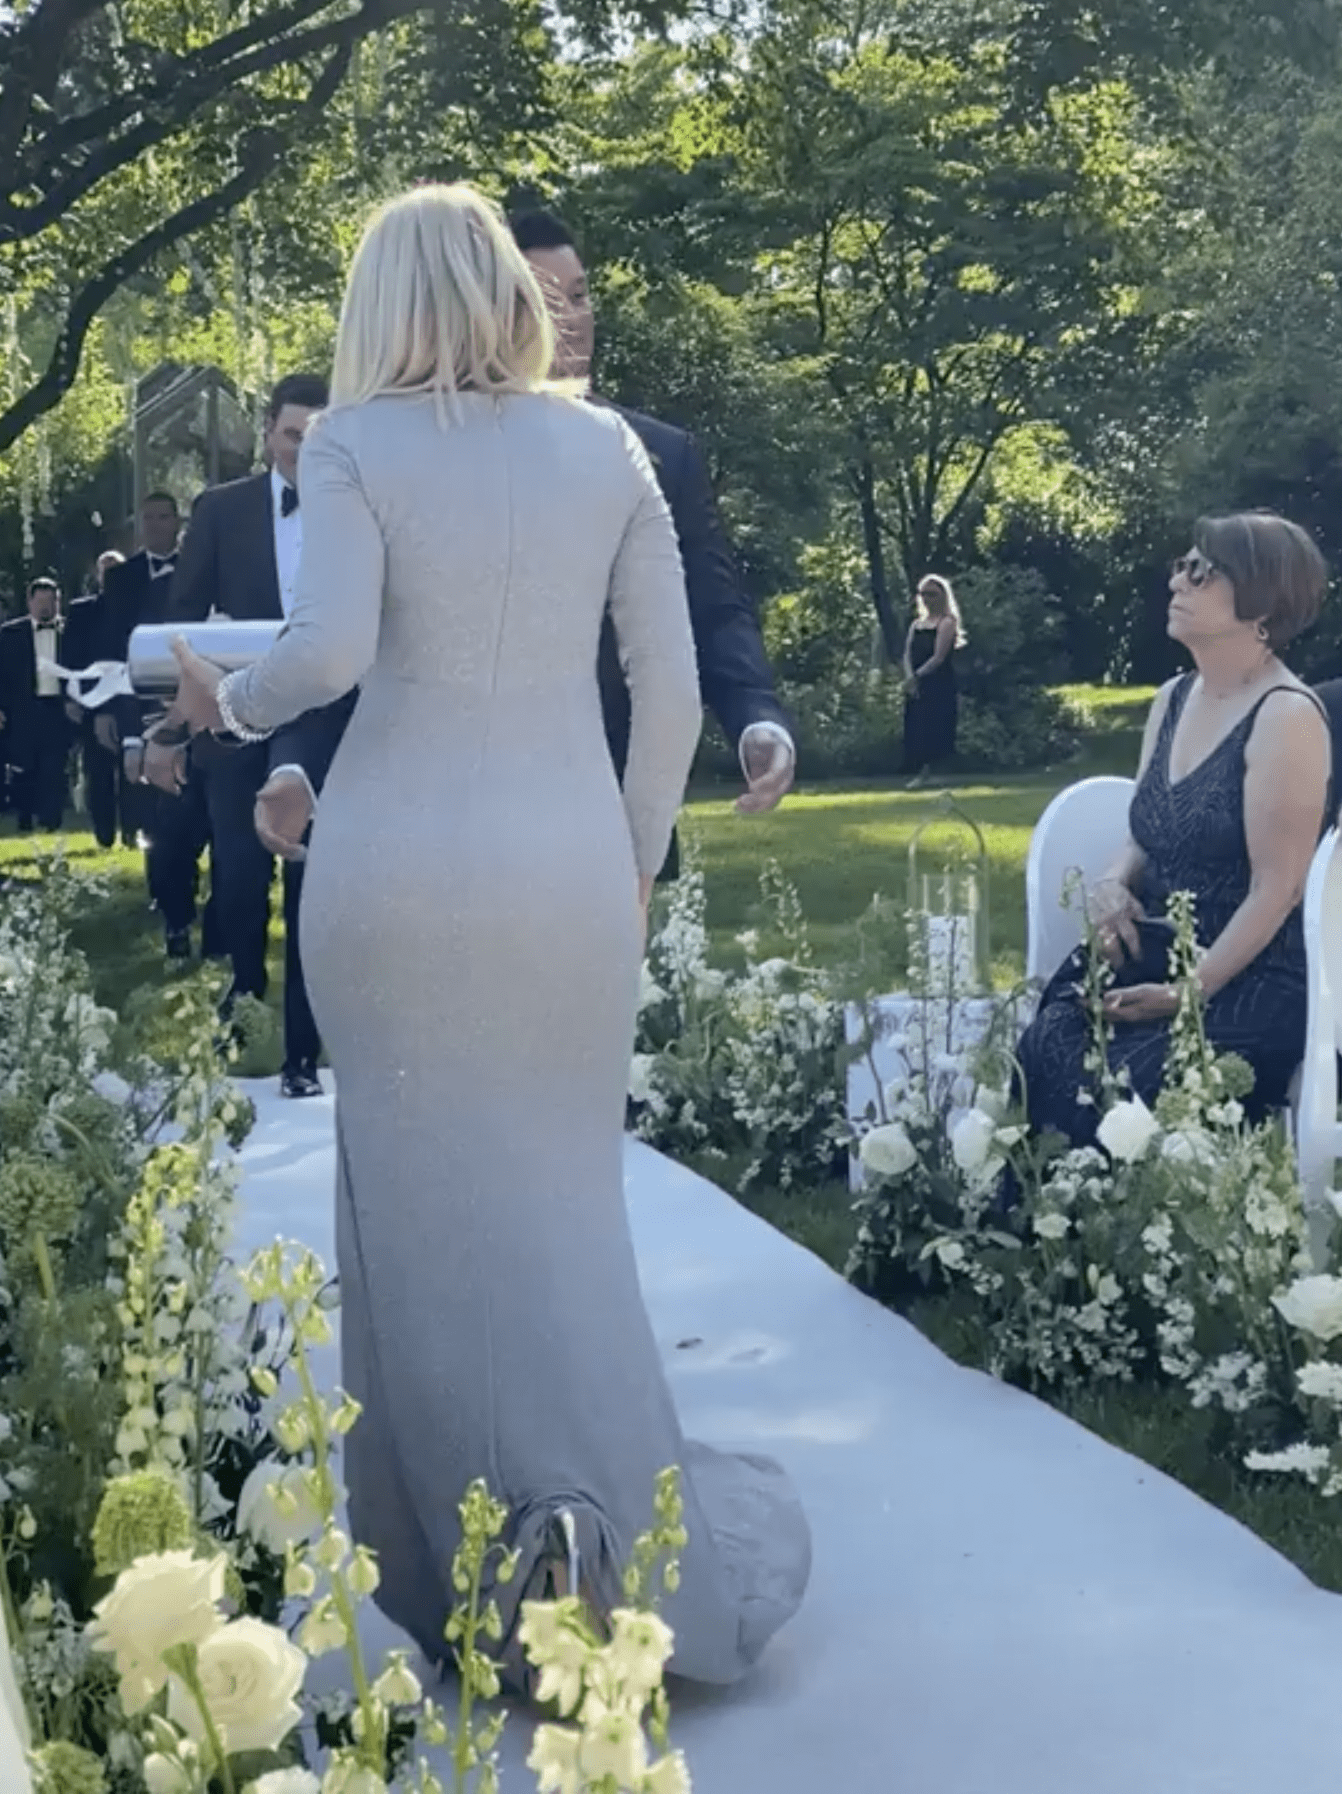 A woman in cream-colored dress walks down the aisle while the groom passes by her. | Source: reddit.com/r/weddingshaming